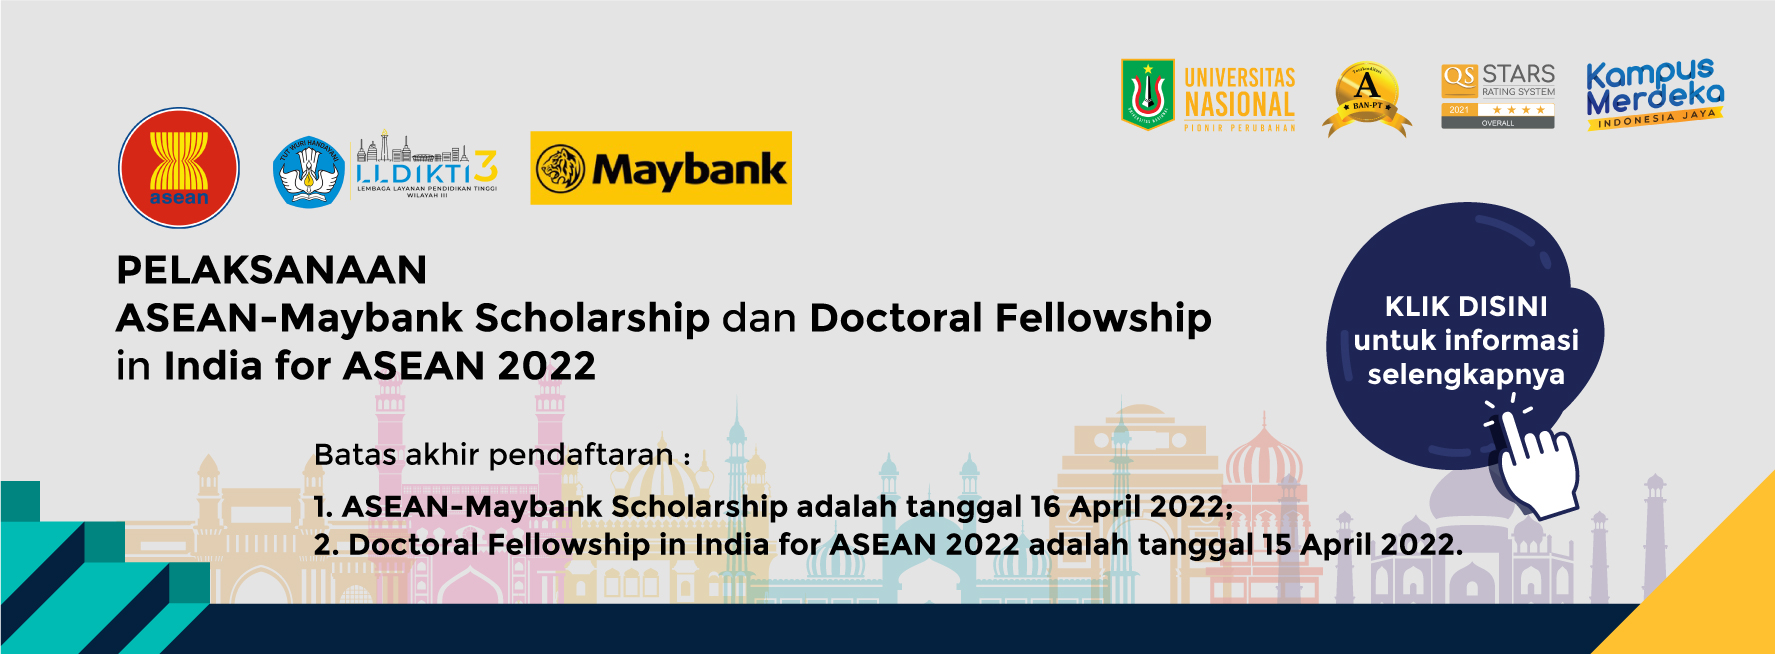 ASEAN-Maybank-Scholarship-And-Doctoral-Fellowship-in-India